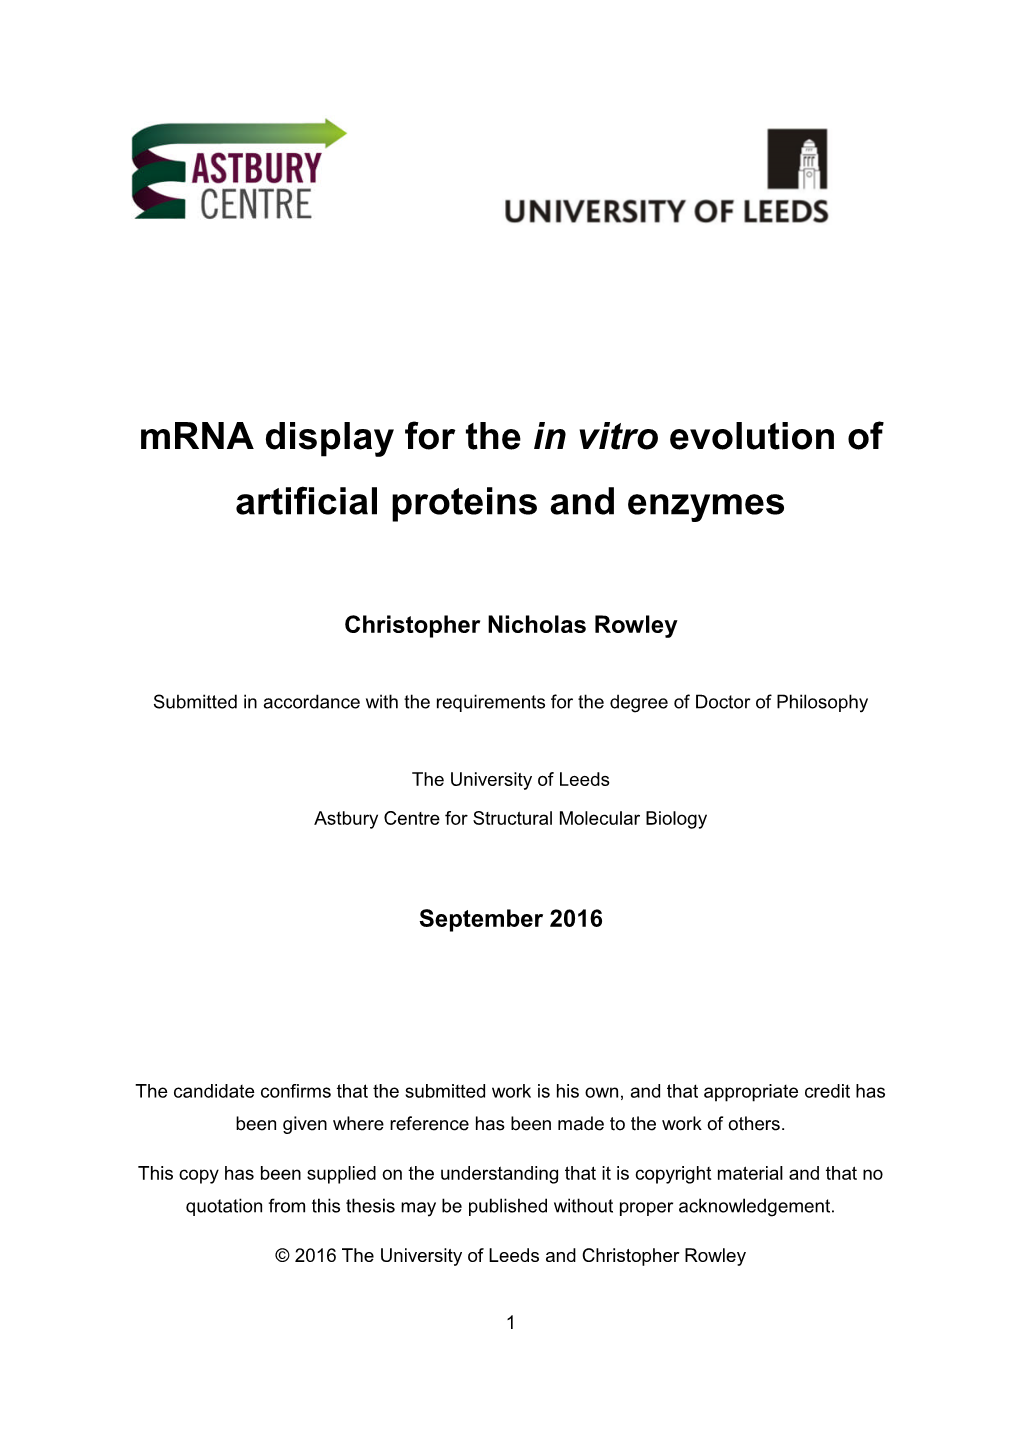 Mrna Display for the in Vitro Evolution of Artificial Proteins and Enzymes